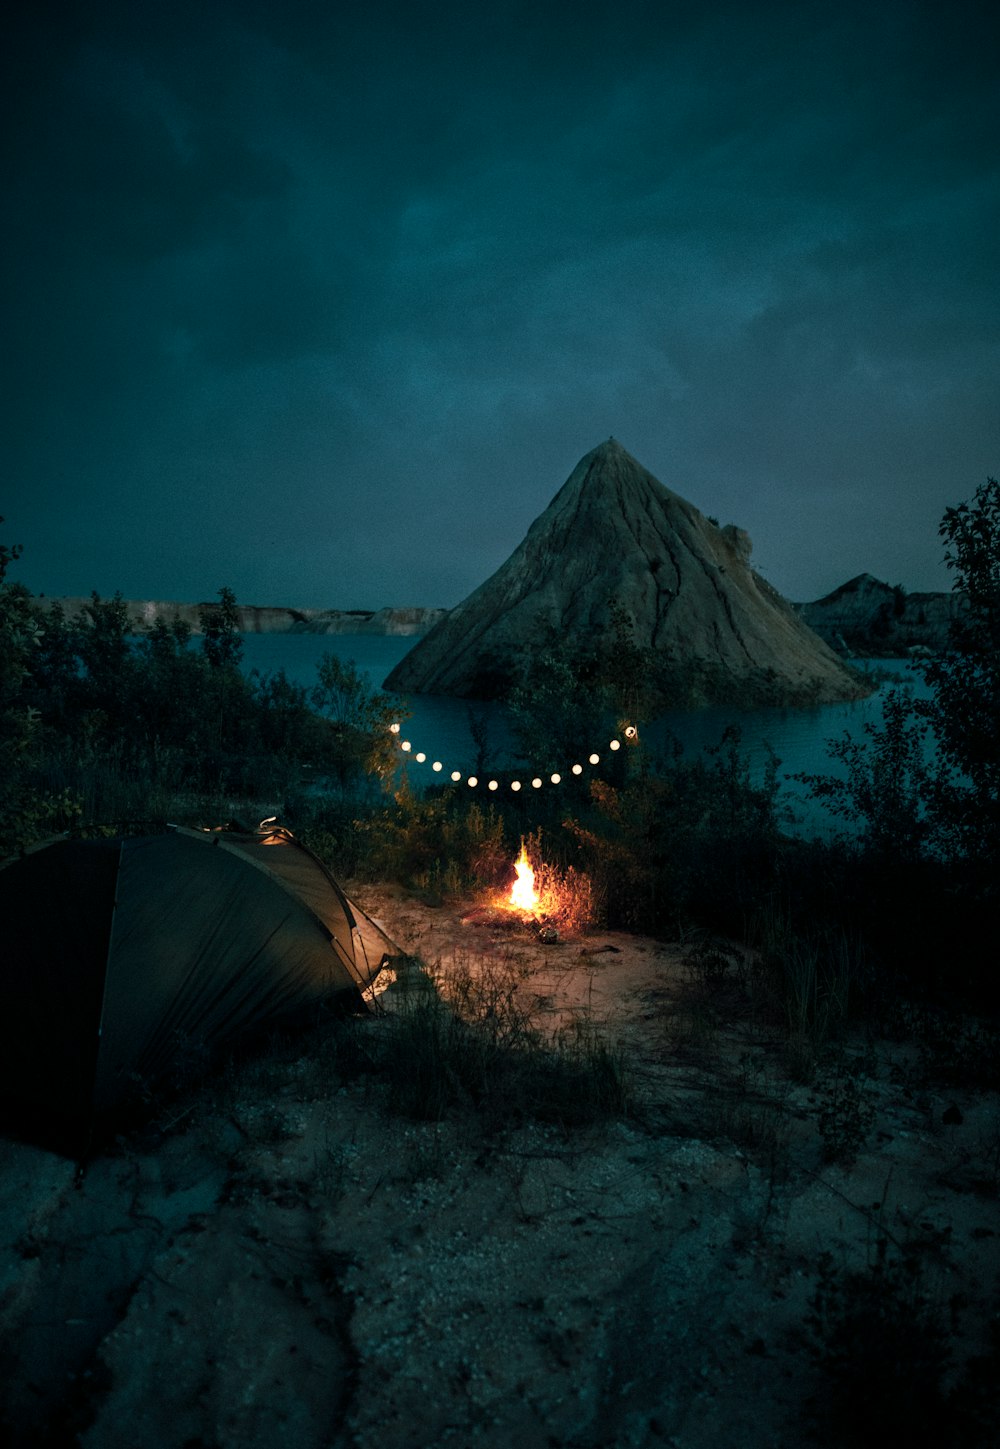 bonfire near tent and mountain during night time